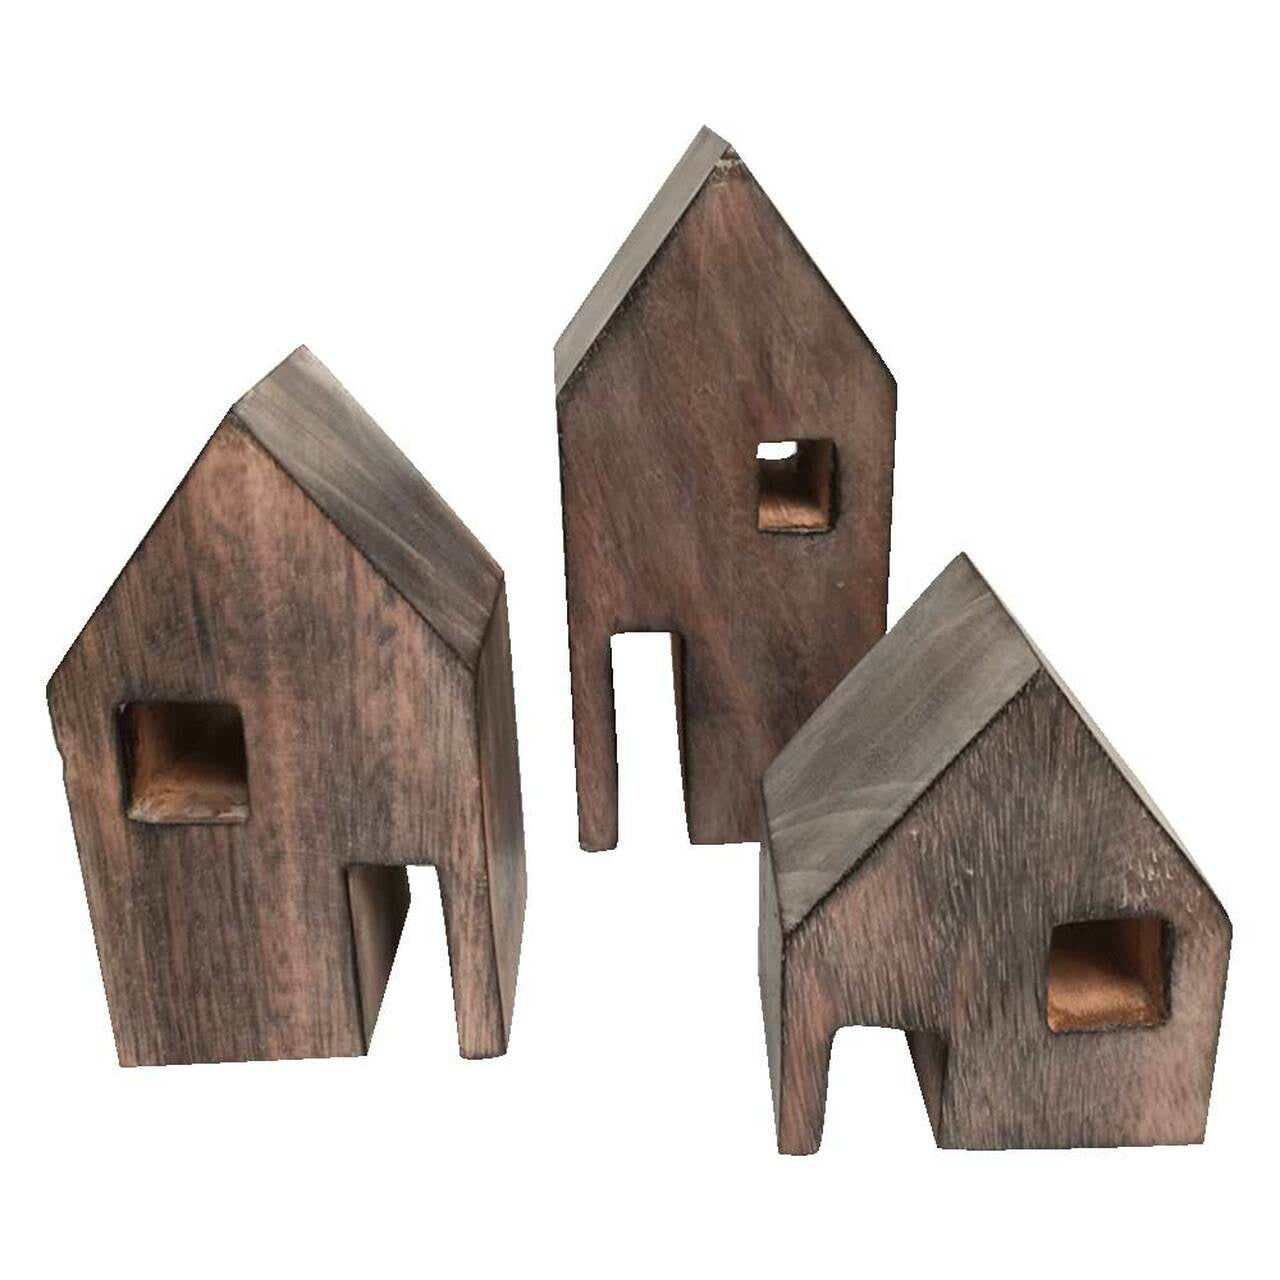 PAPOOSE Wood Block Houses - Set of 3